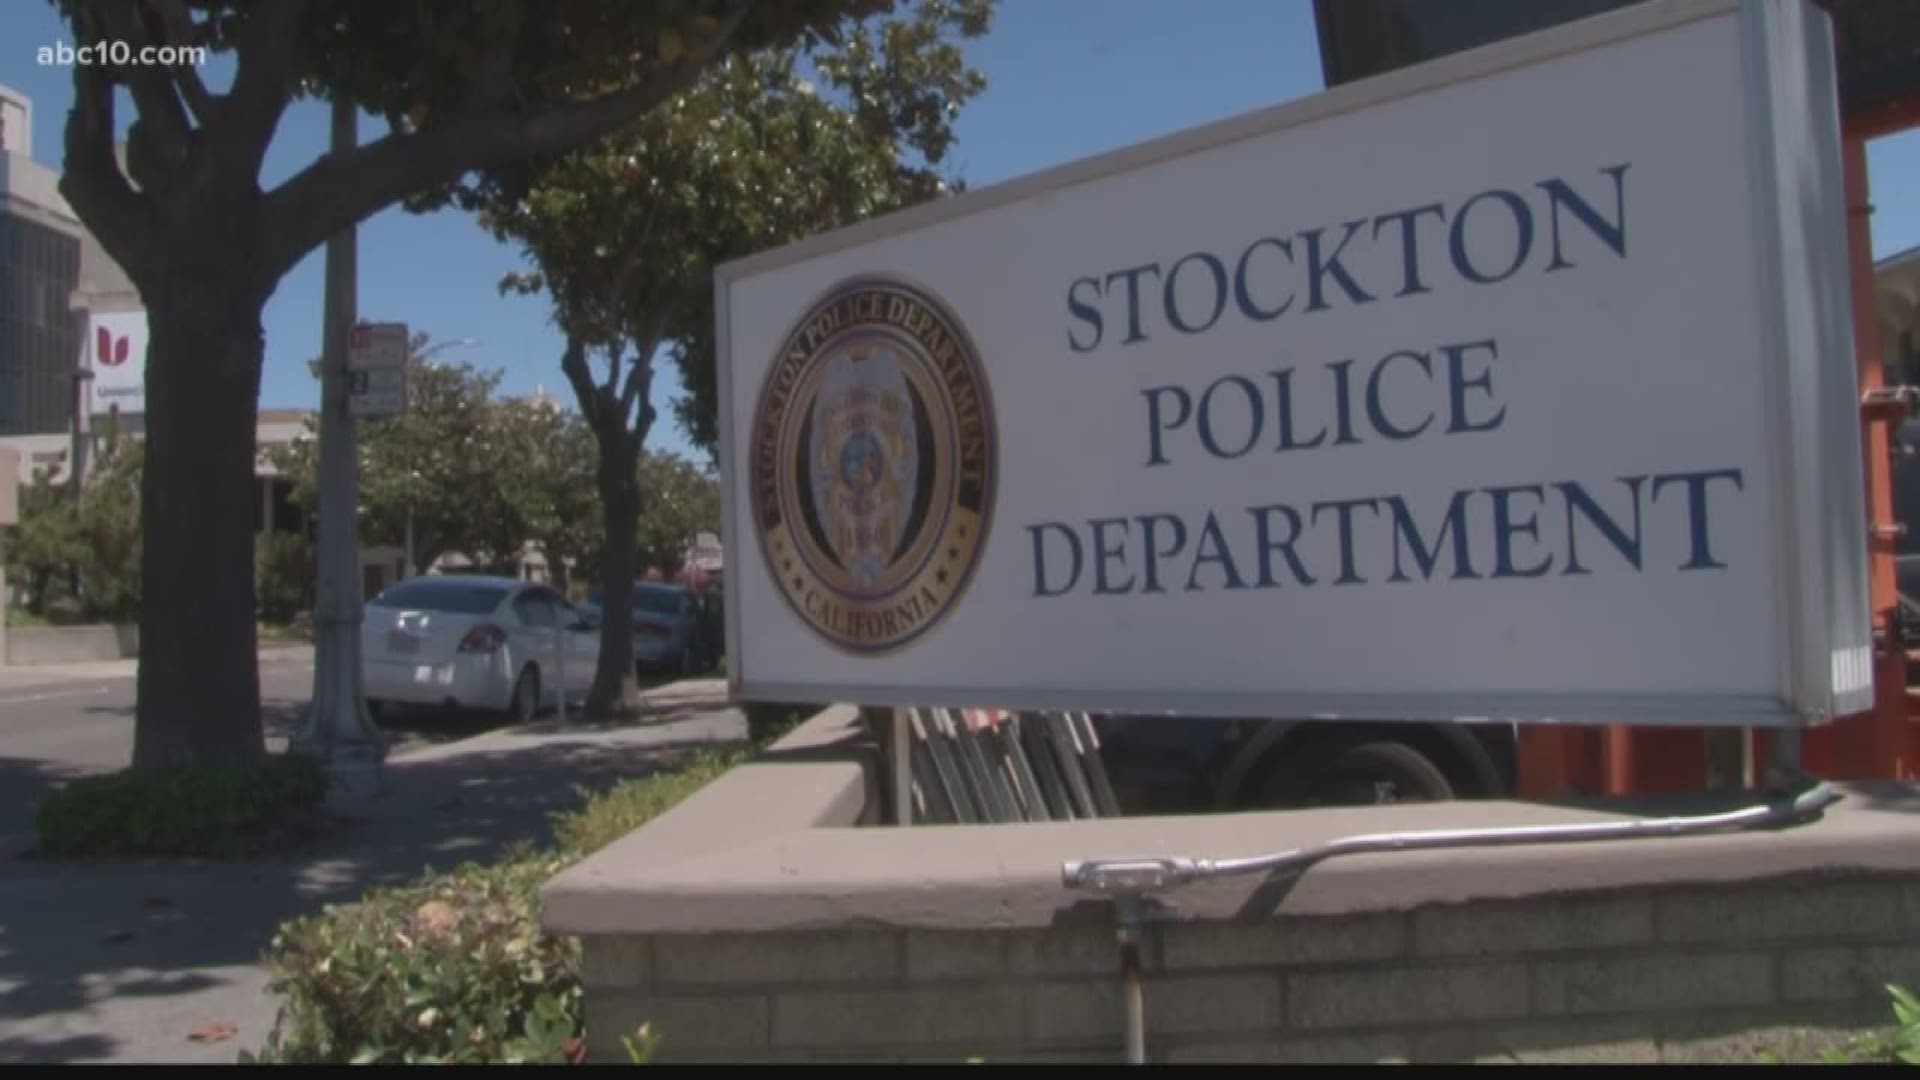 For the first time in Stockton Police Department history, the department will have its own helicopter.